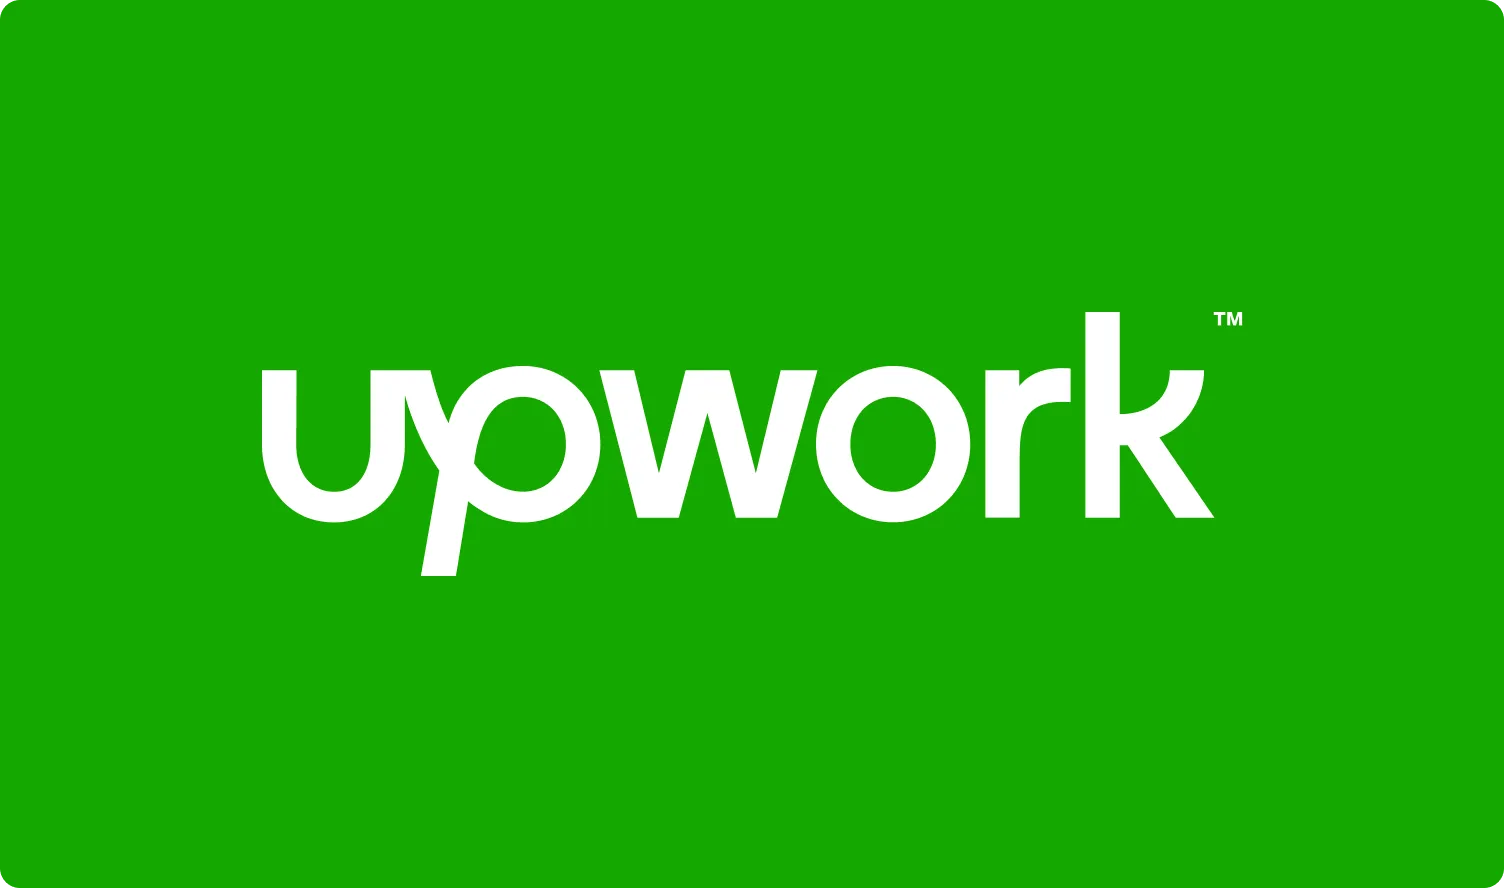 7 Typical Issues in Upwork Hiring